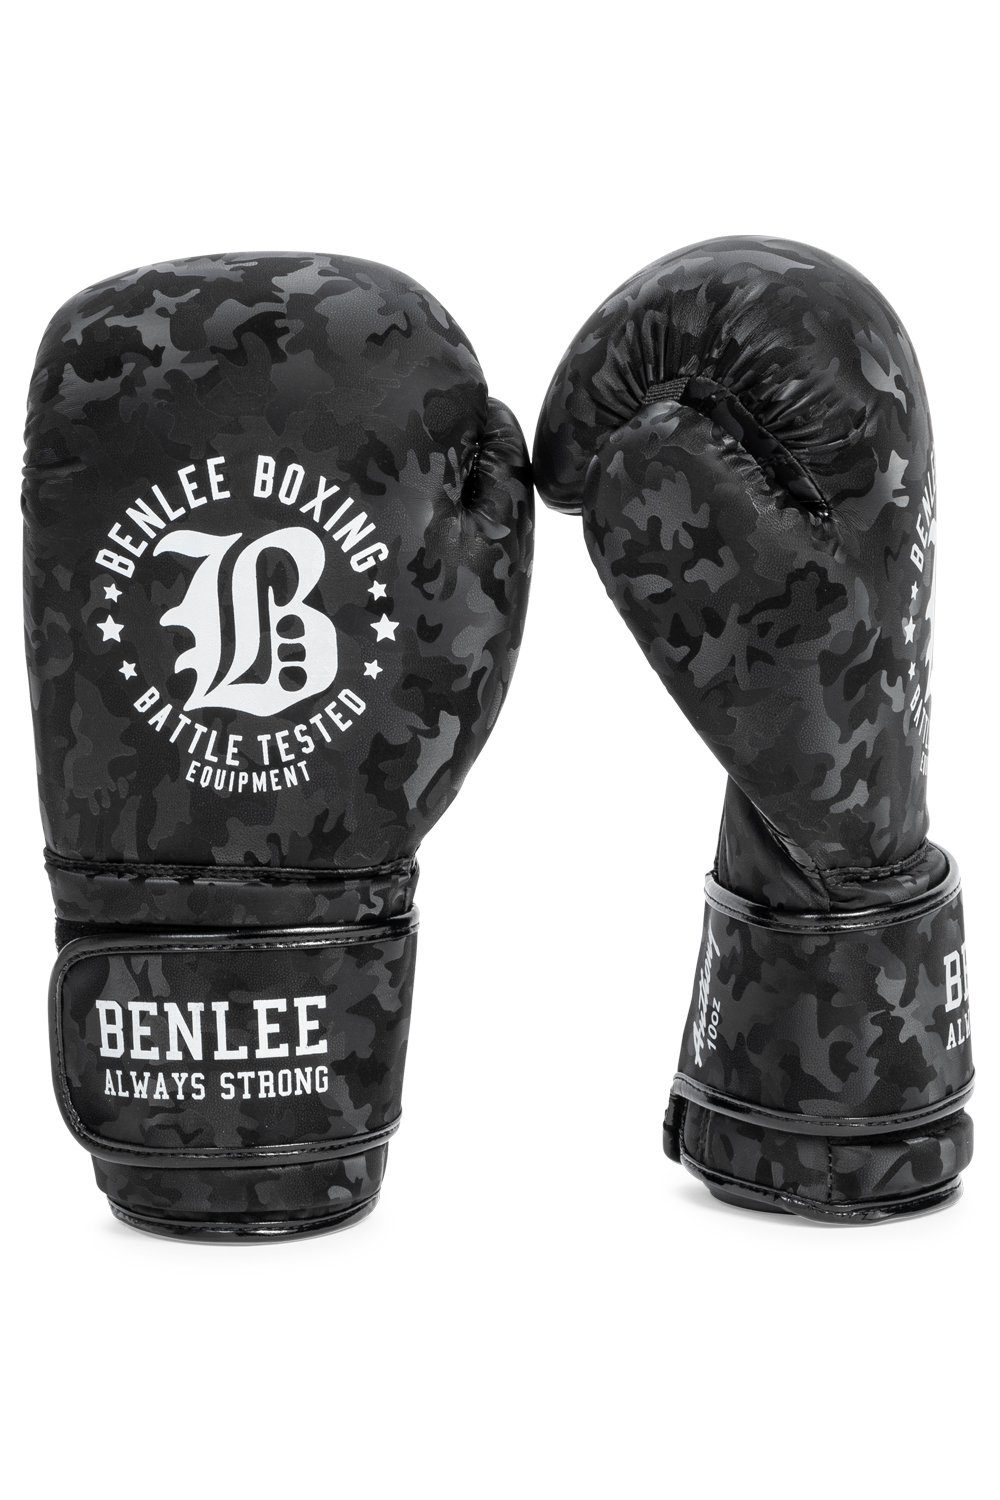 Benlee Rocky ANTHONY Boxhandschuhe Marciano